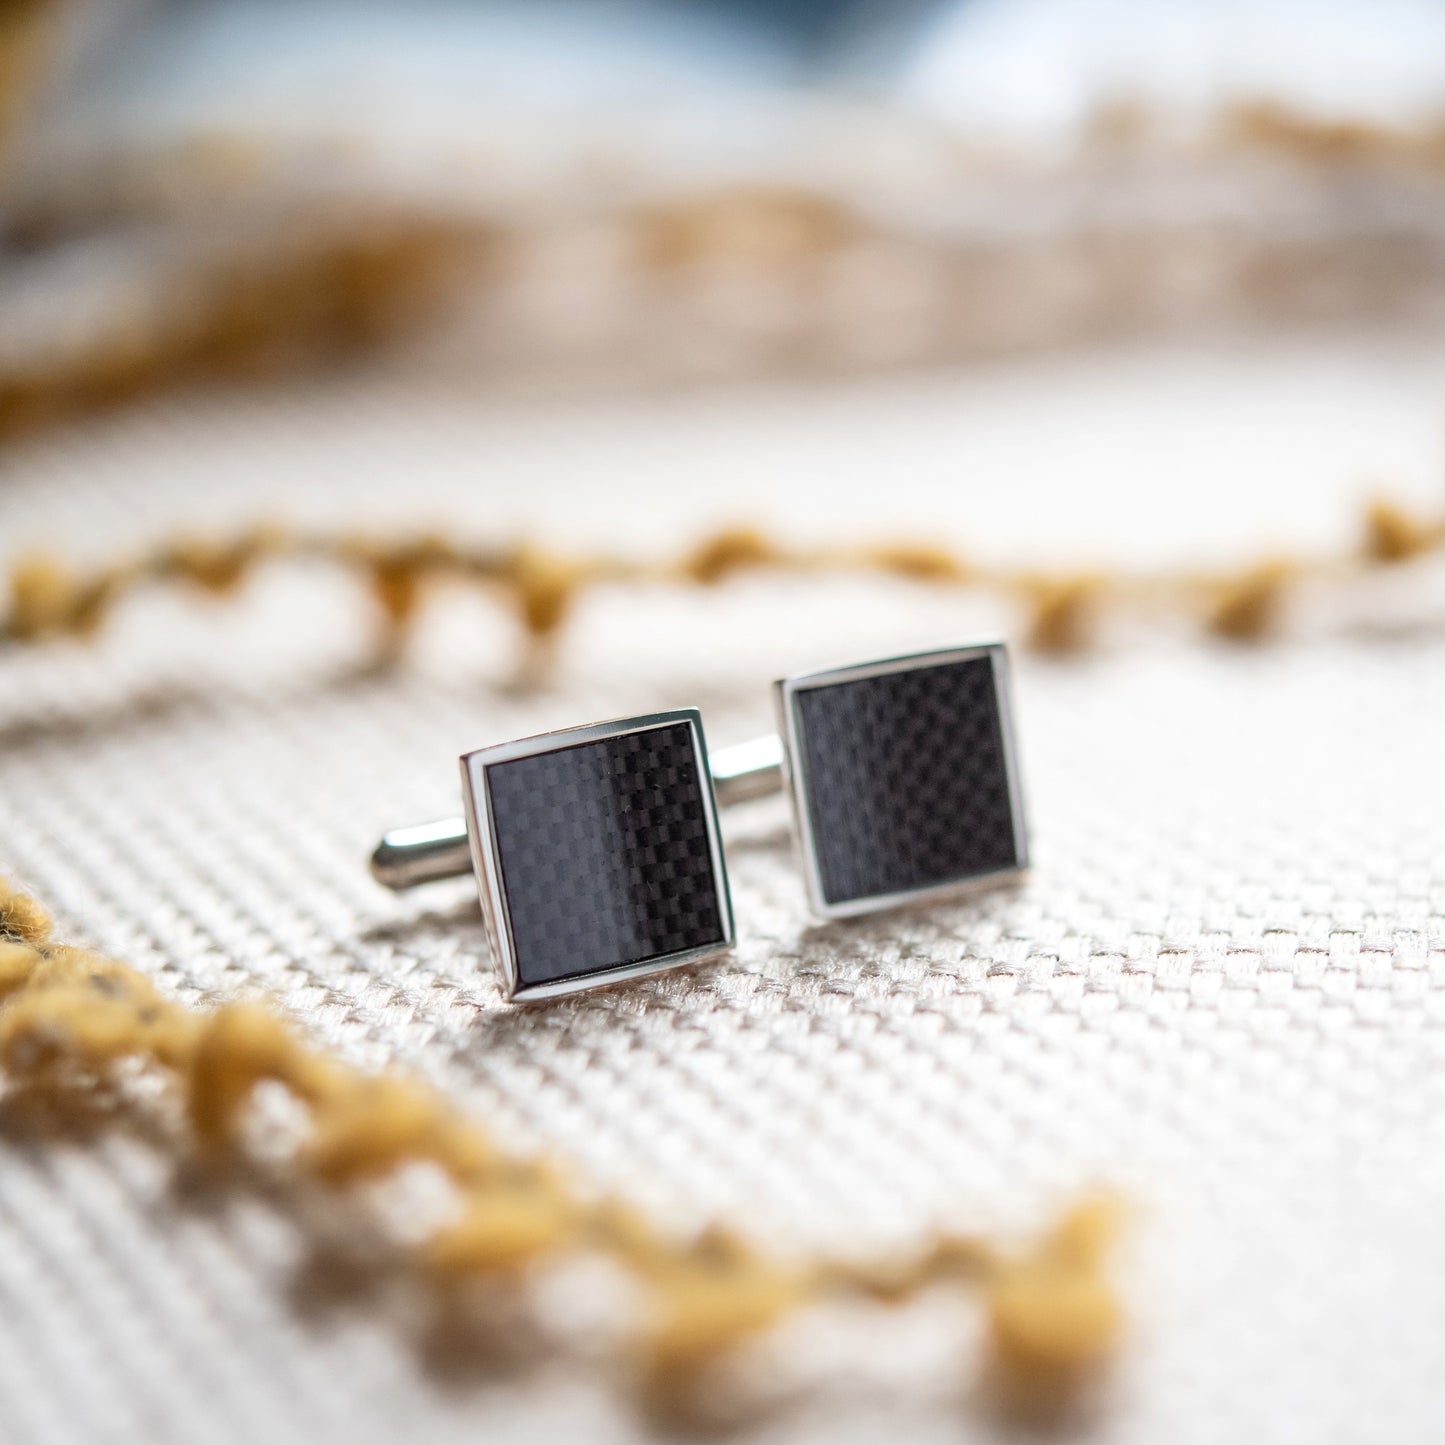 Carbon Fiber Square Cuff Links for Men Stylish Wedding, Anniversary, Birthday or Father's Day Gift